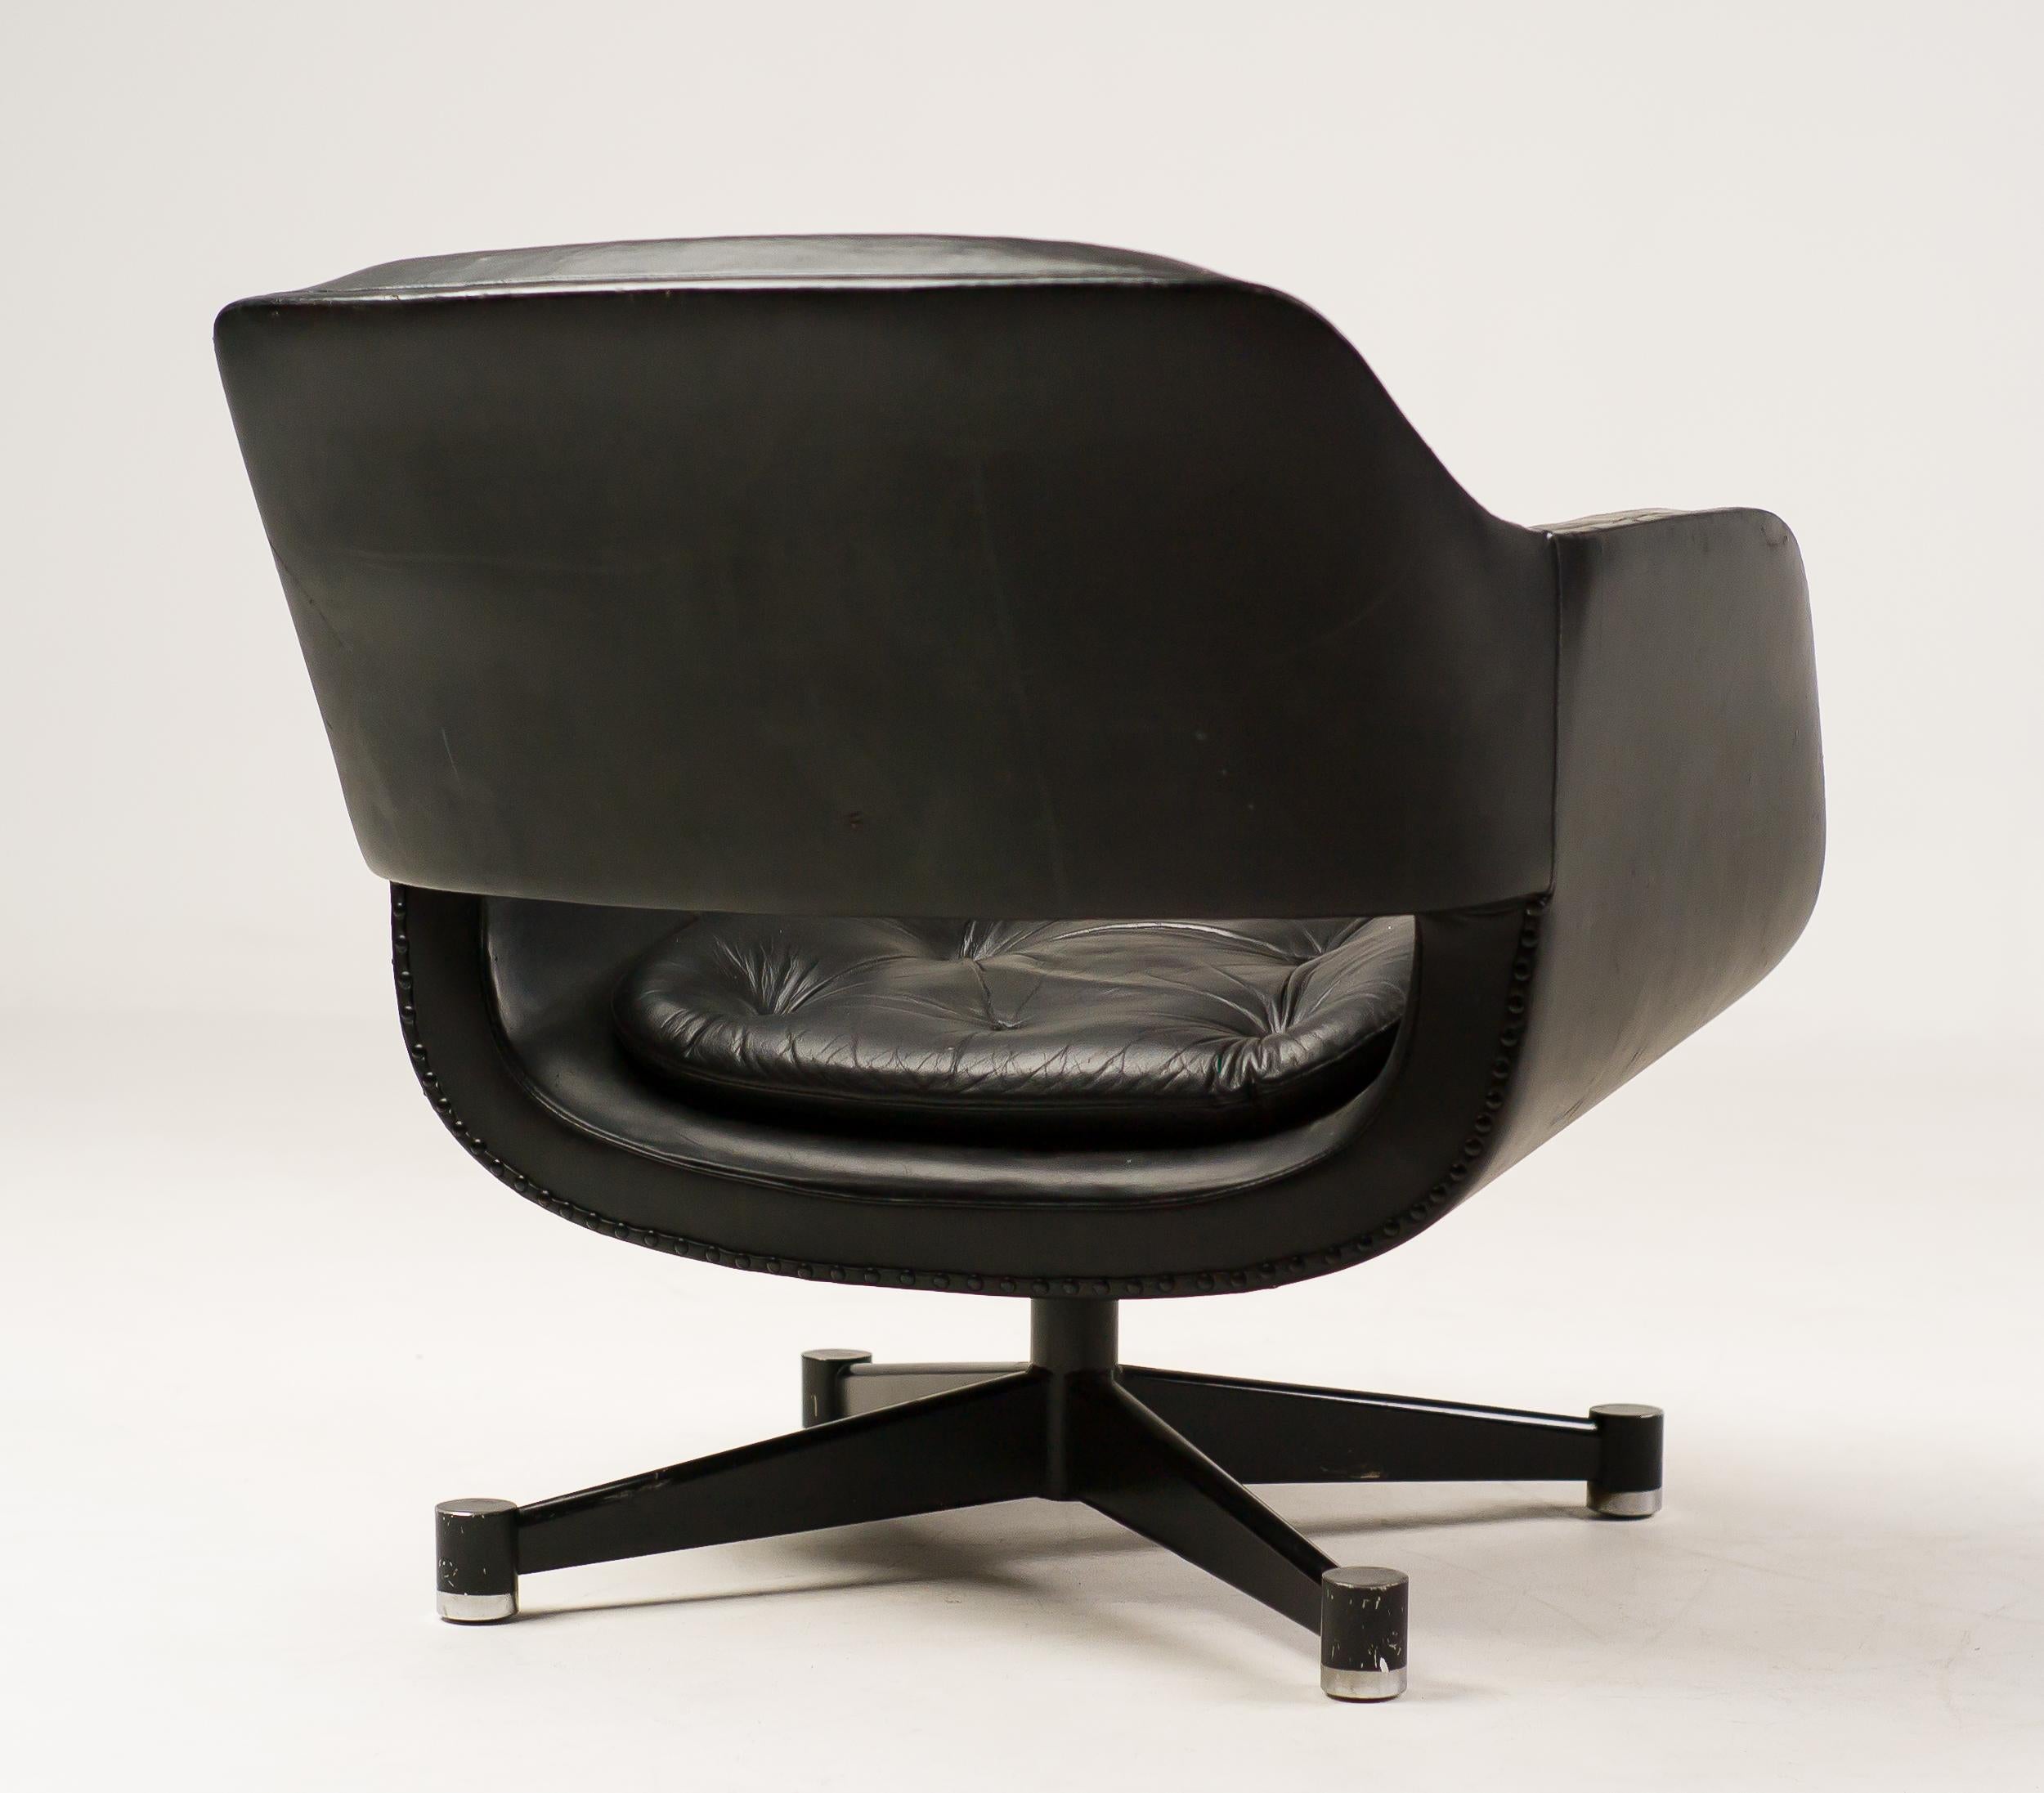 Black leather lounge chair designed by Olli Mannermaa for Finnart Ab.
Rare and very comfortable swivelling armchair in original vintage condition.
The leather is in good condition, the arms have wear but no cracks.

Olli Mannermaa was the